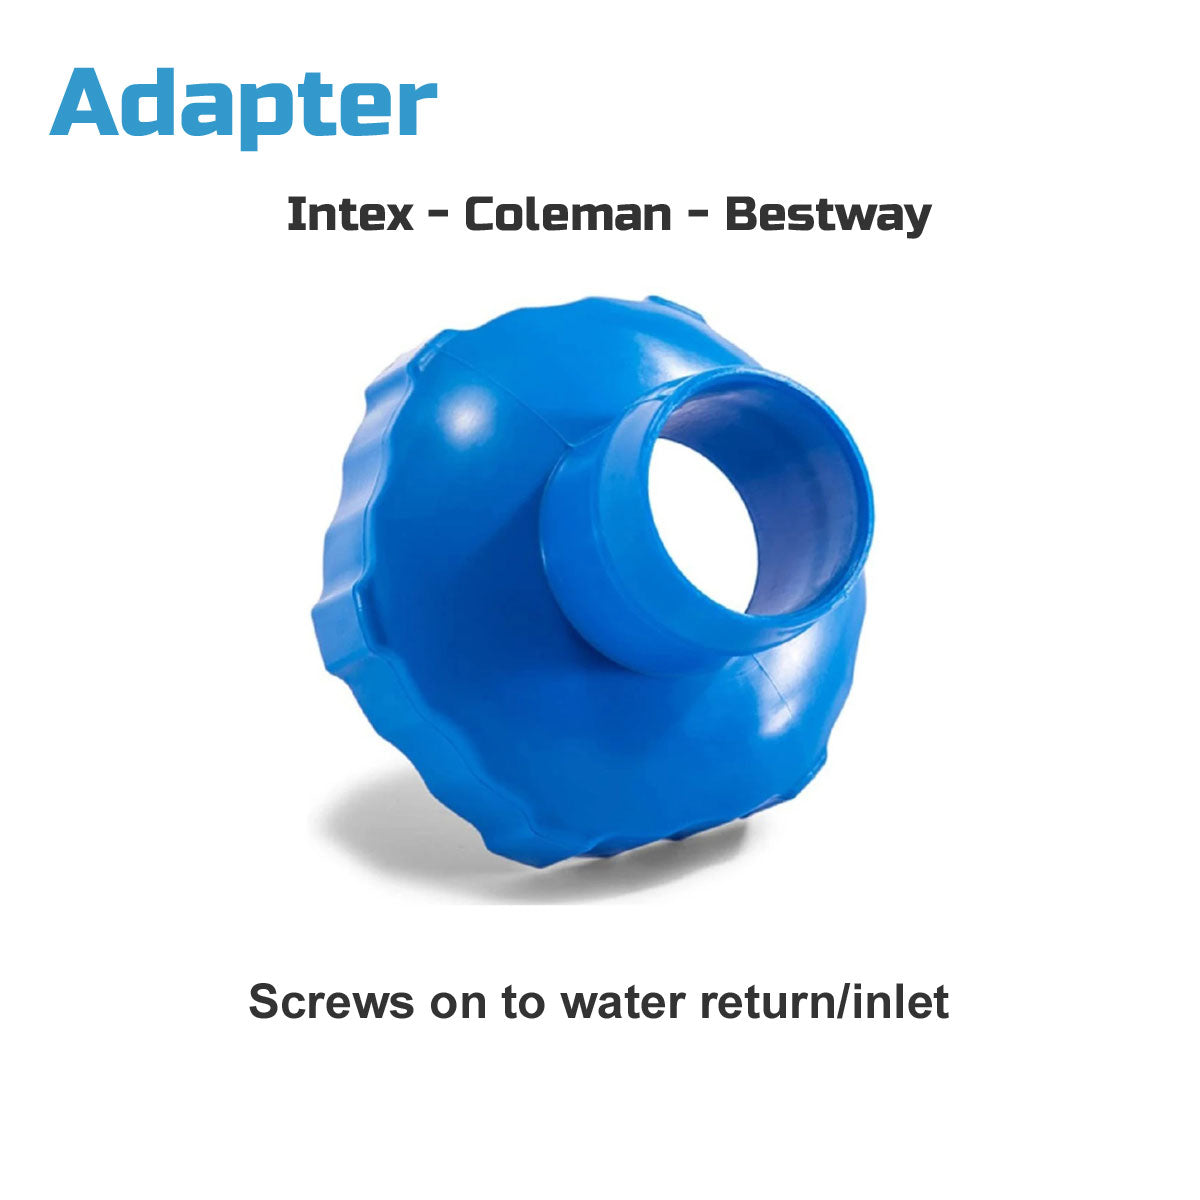 Adapter for Intex, Coleman and Bestway Swimming Pools